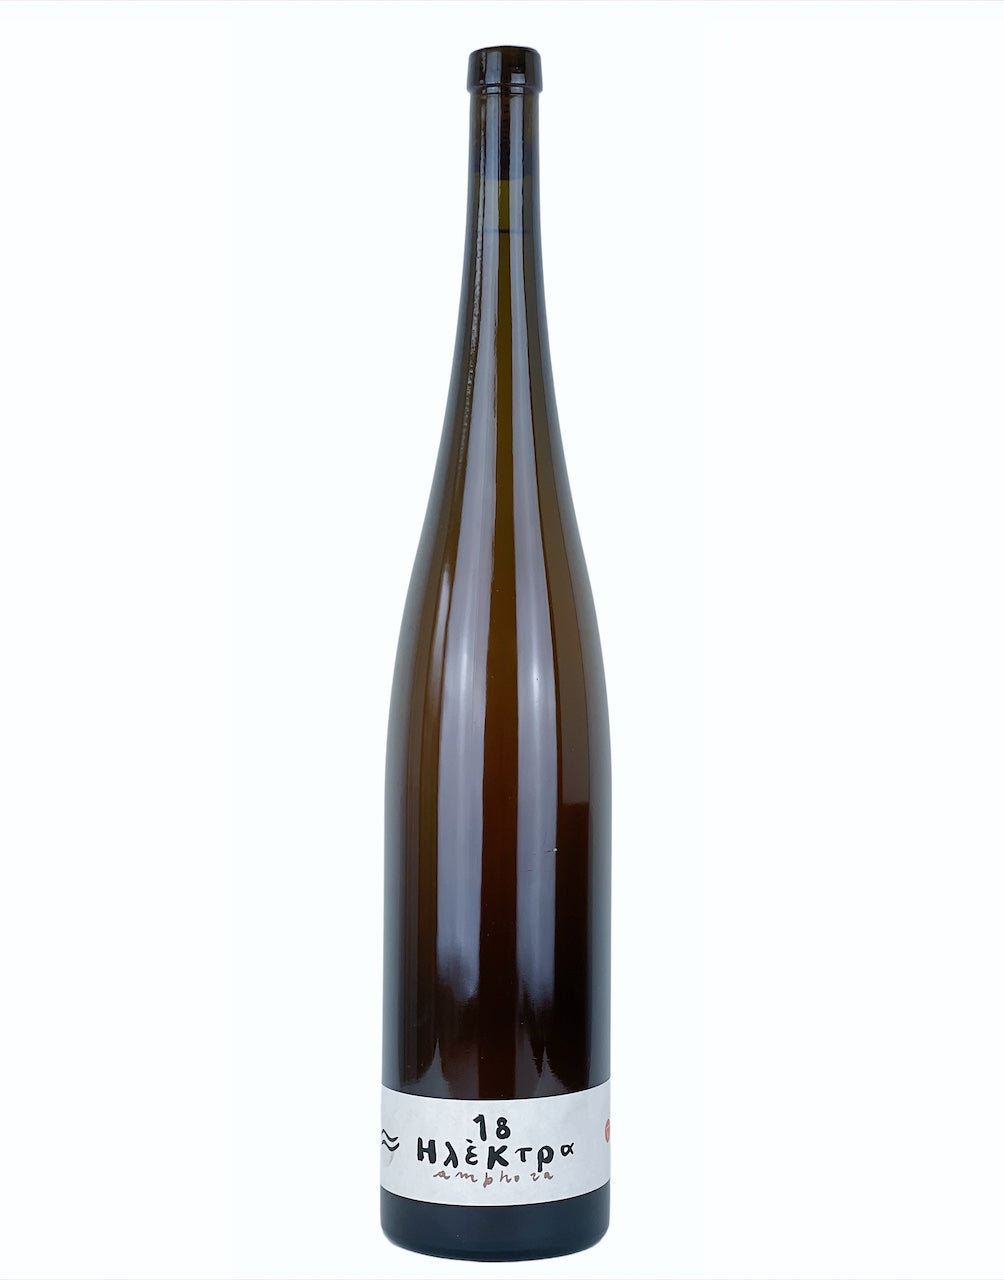 Bottle of Elektra, a Natural Wine produced by Valdisole with Malvasia Moscata grapes.